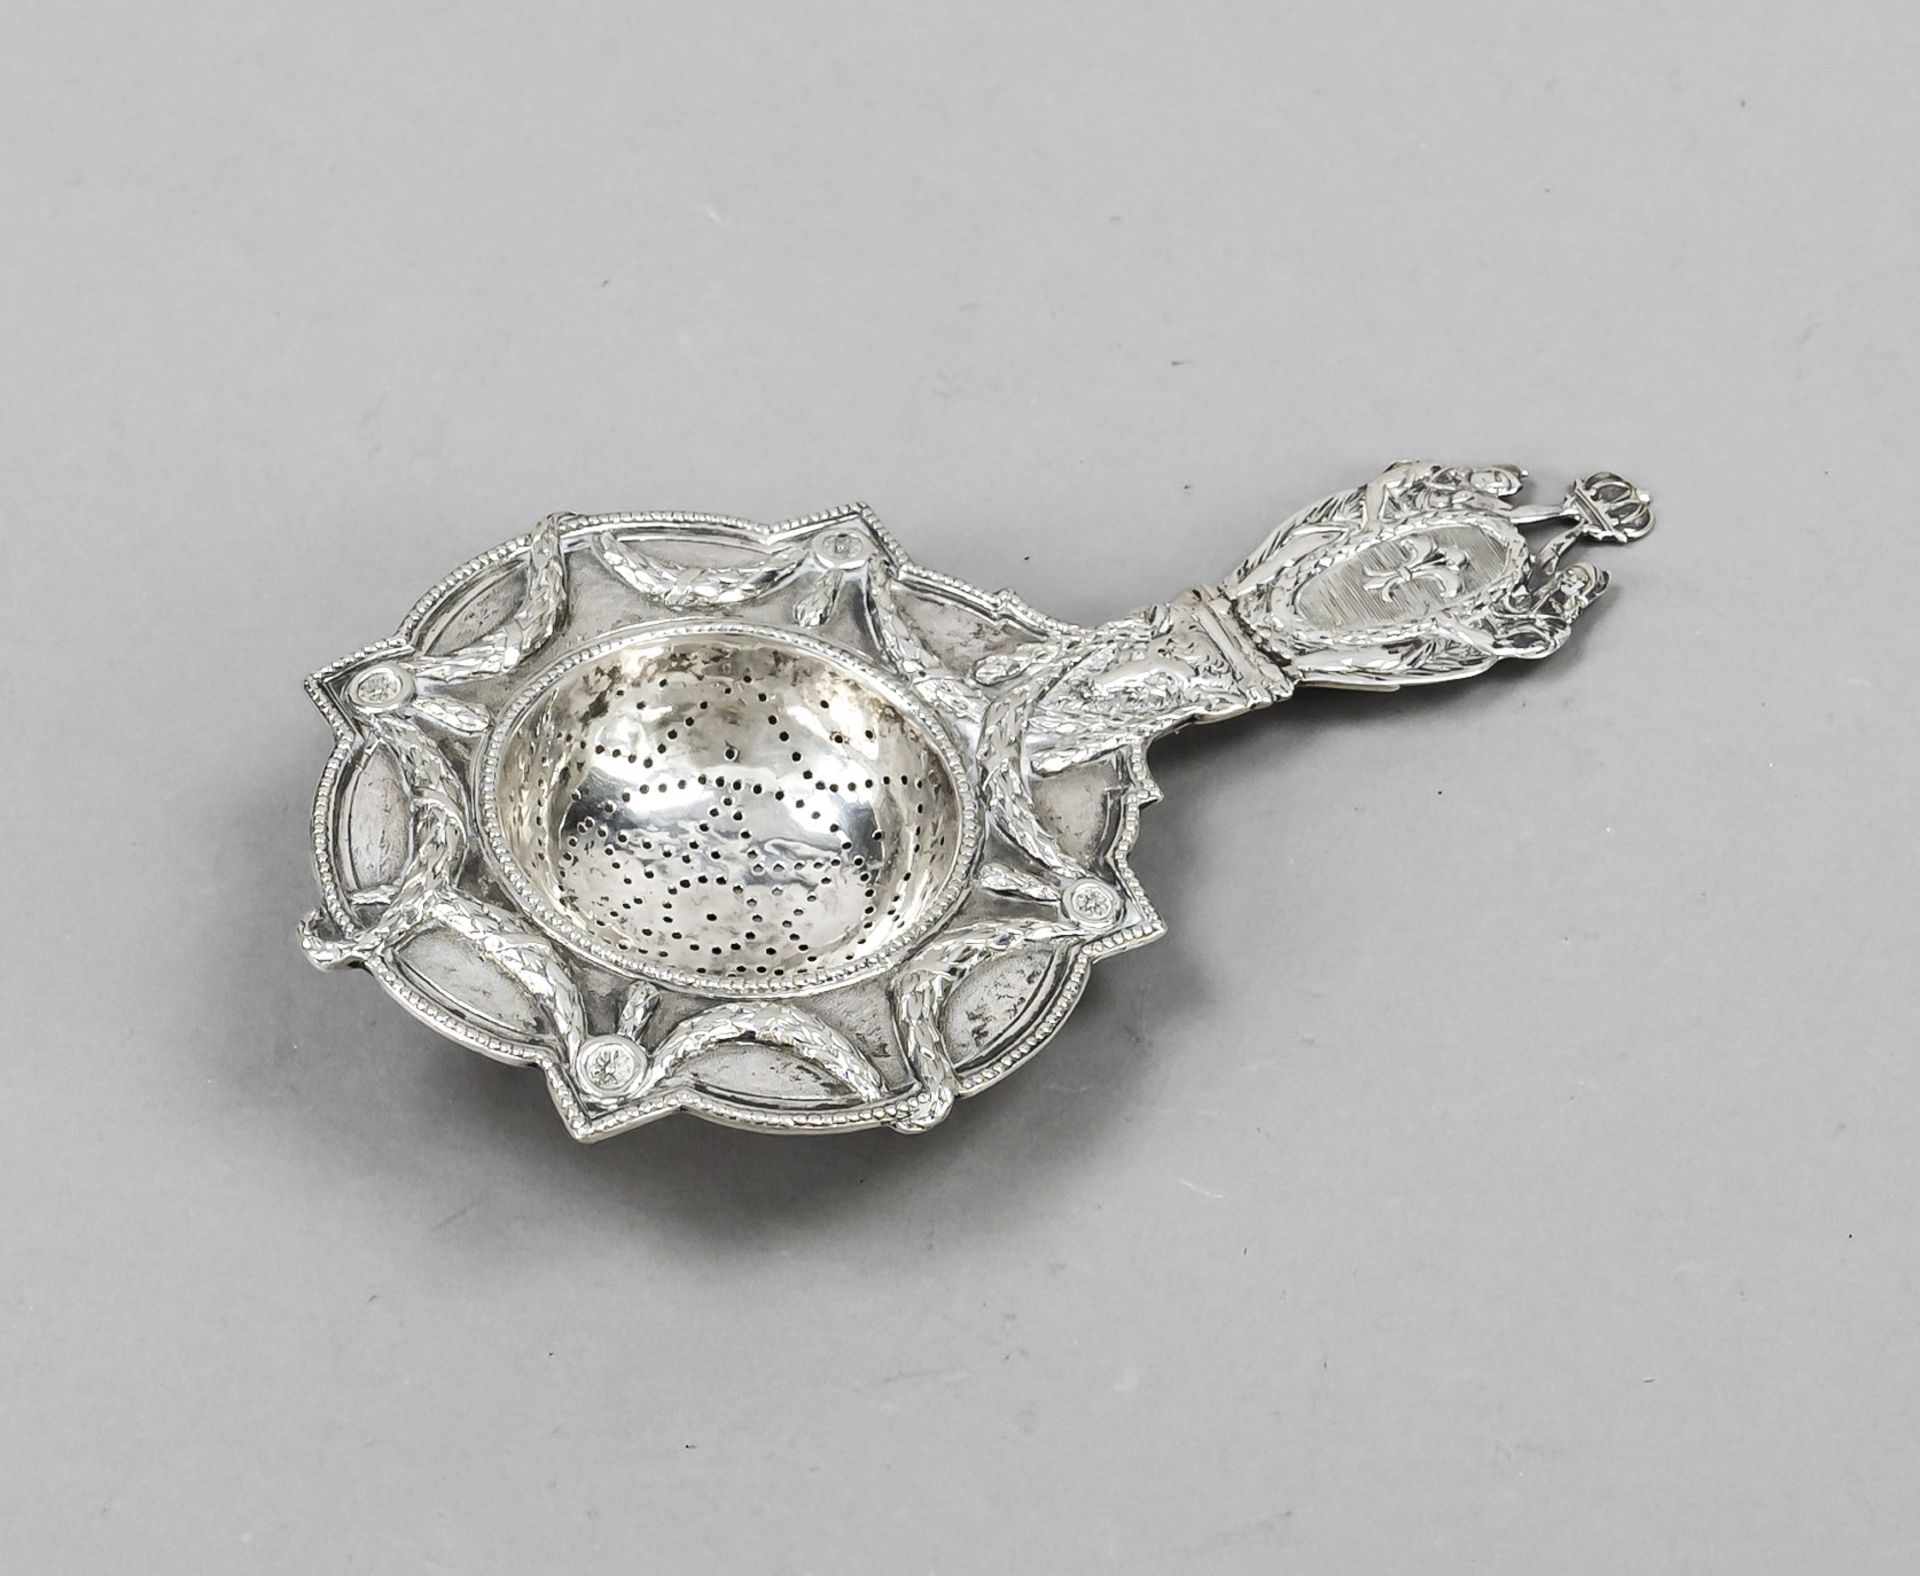 Tea strainer, c. 1900, silver tested, wall with rich relief decoration, floral and figural motifs,